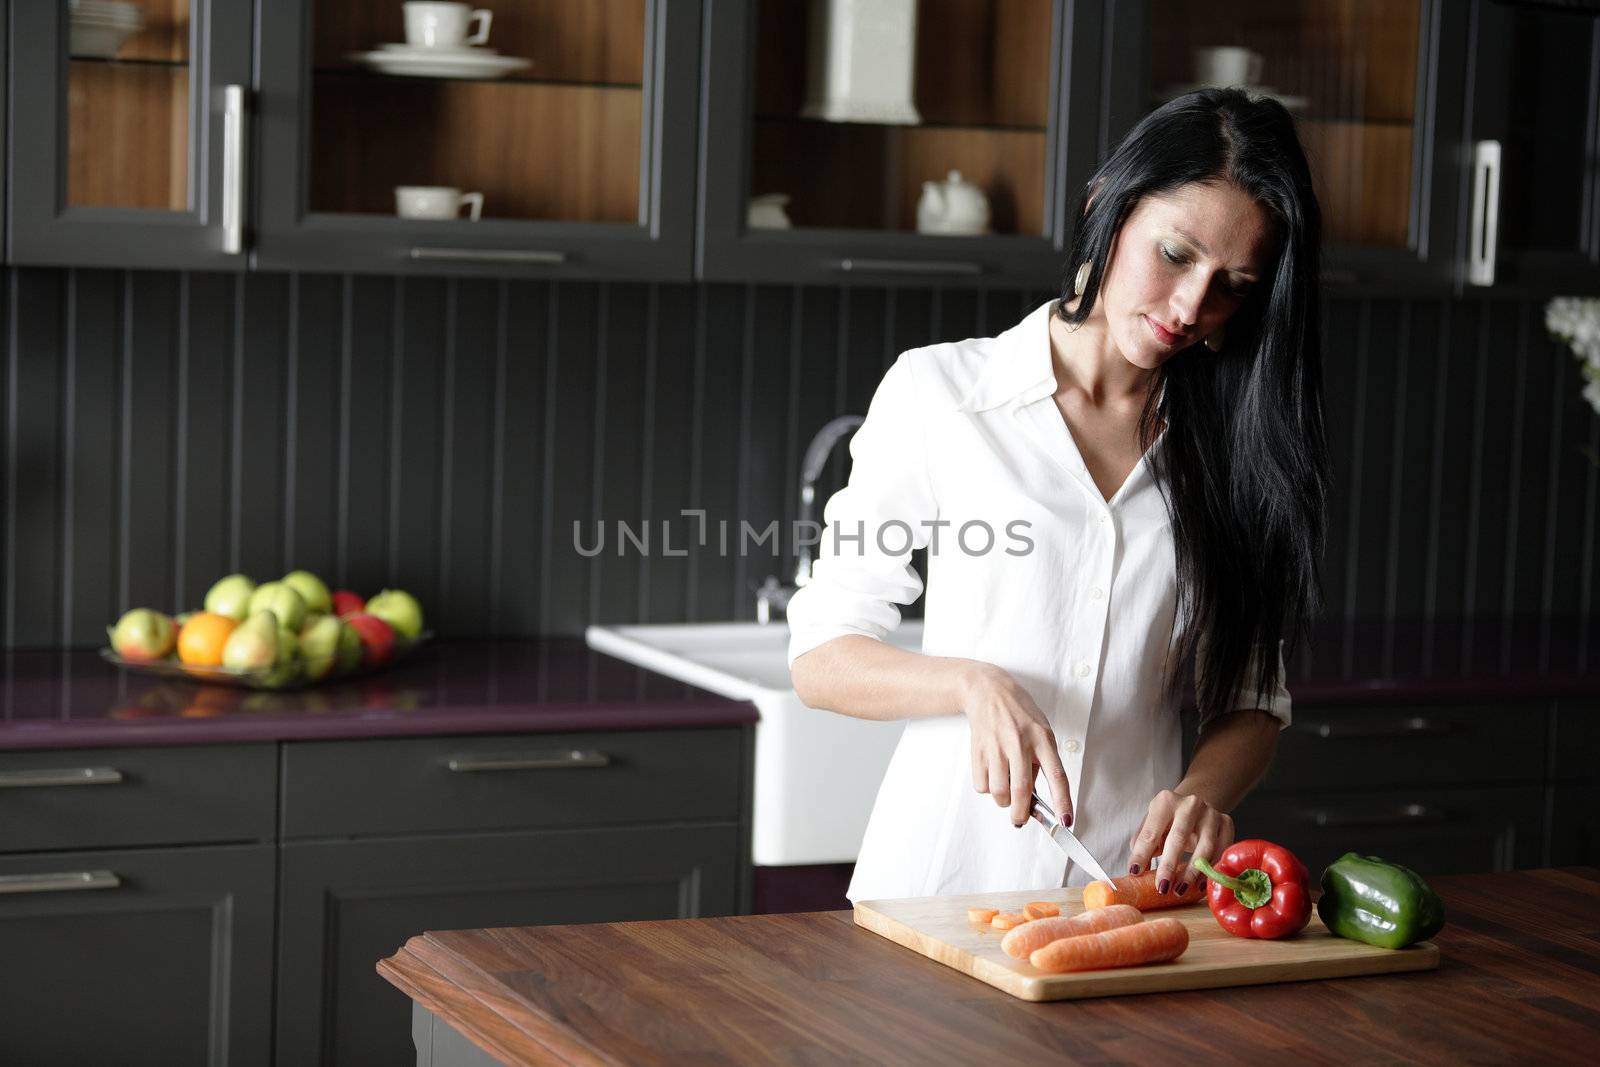 Attractive young woman chopping up fresh vegetables and peppers in her kitchen.